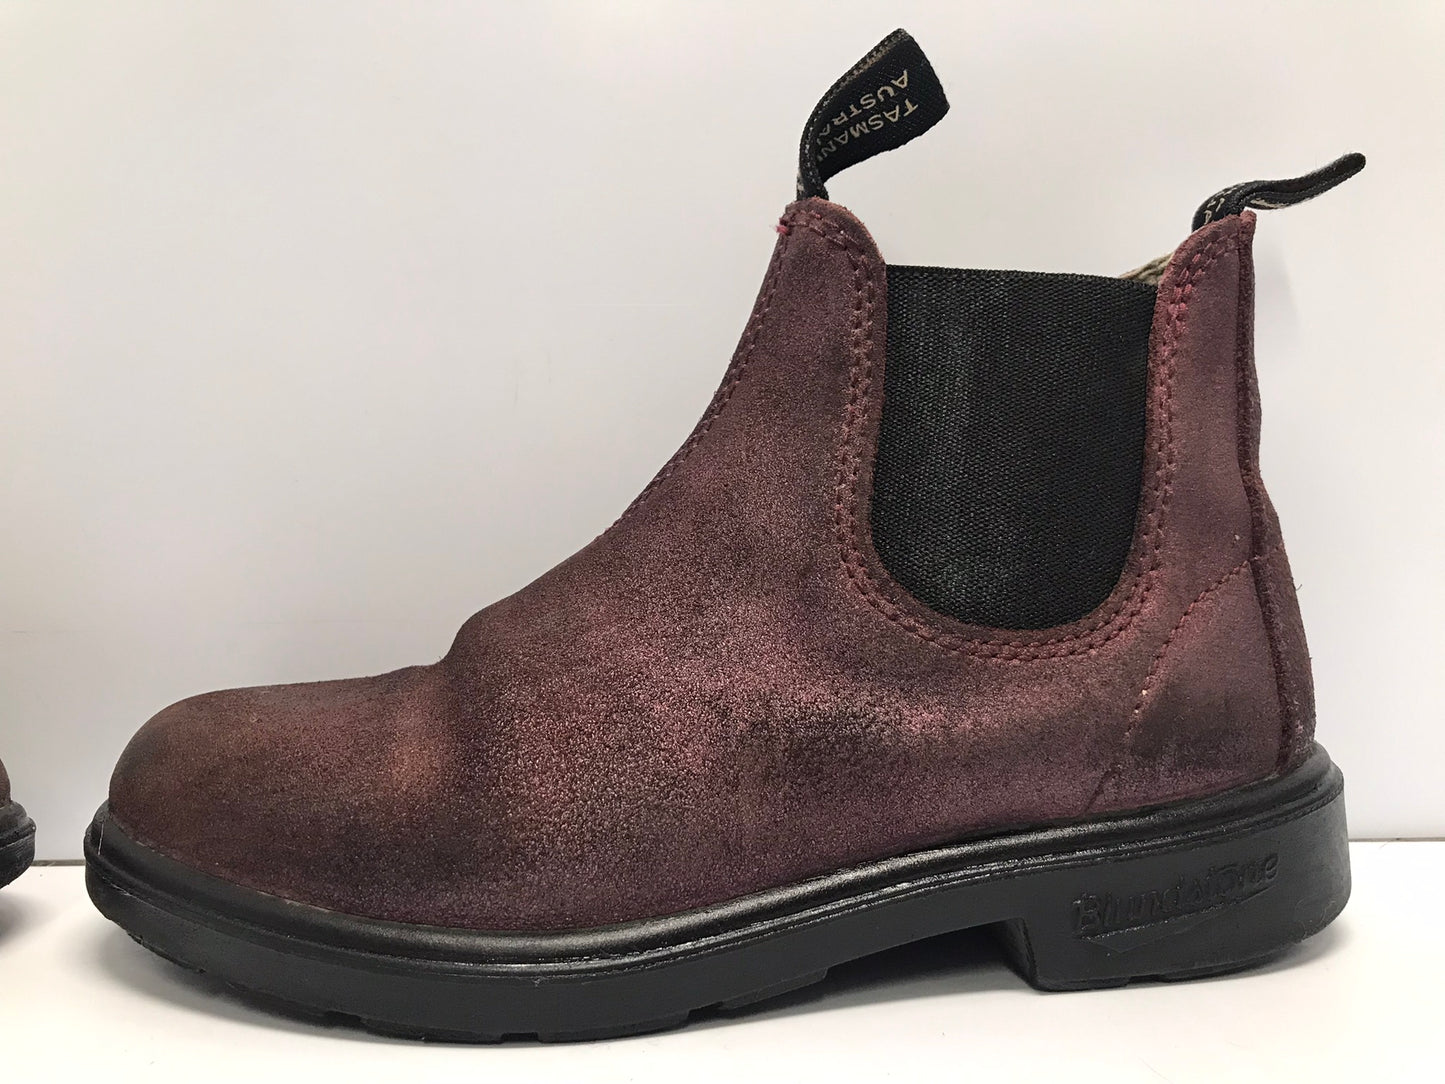 Blundstone Child Size 13 Pink Rose Glitter Sparkle Leather Excellent Condition and Quality